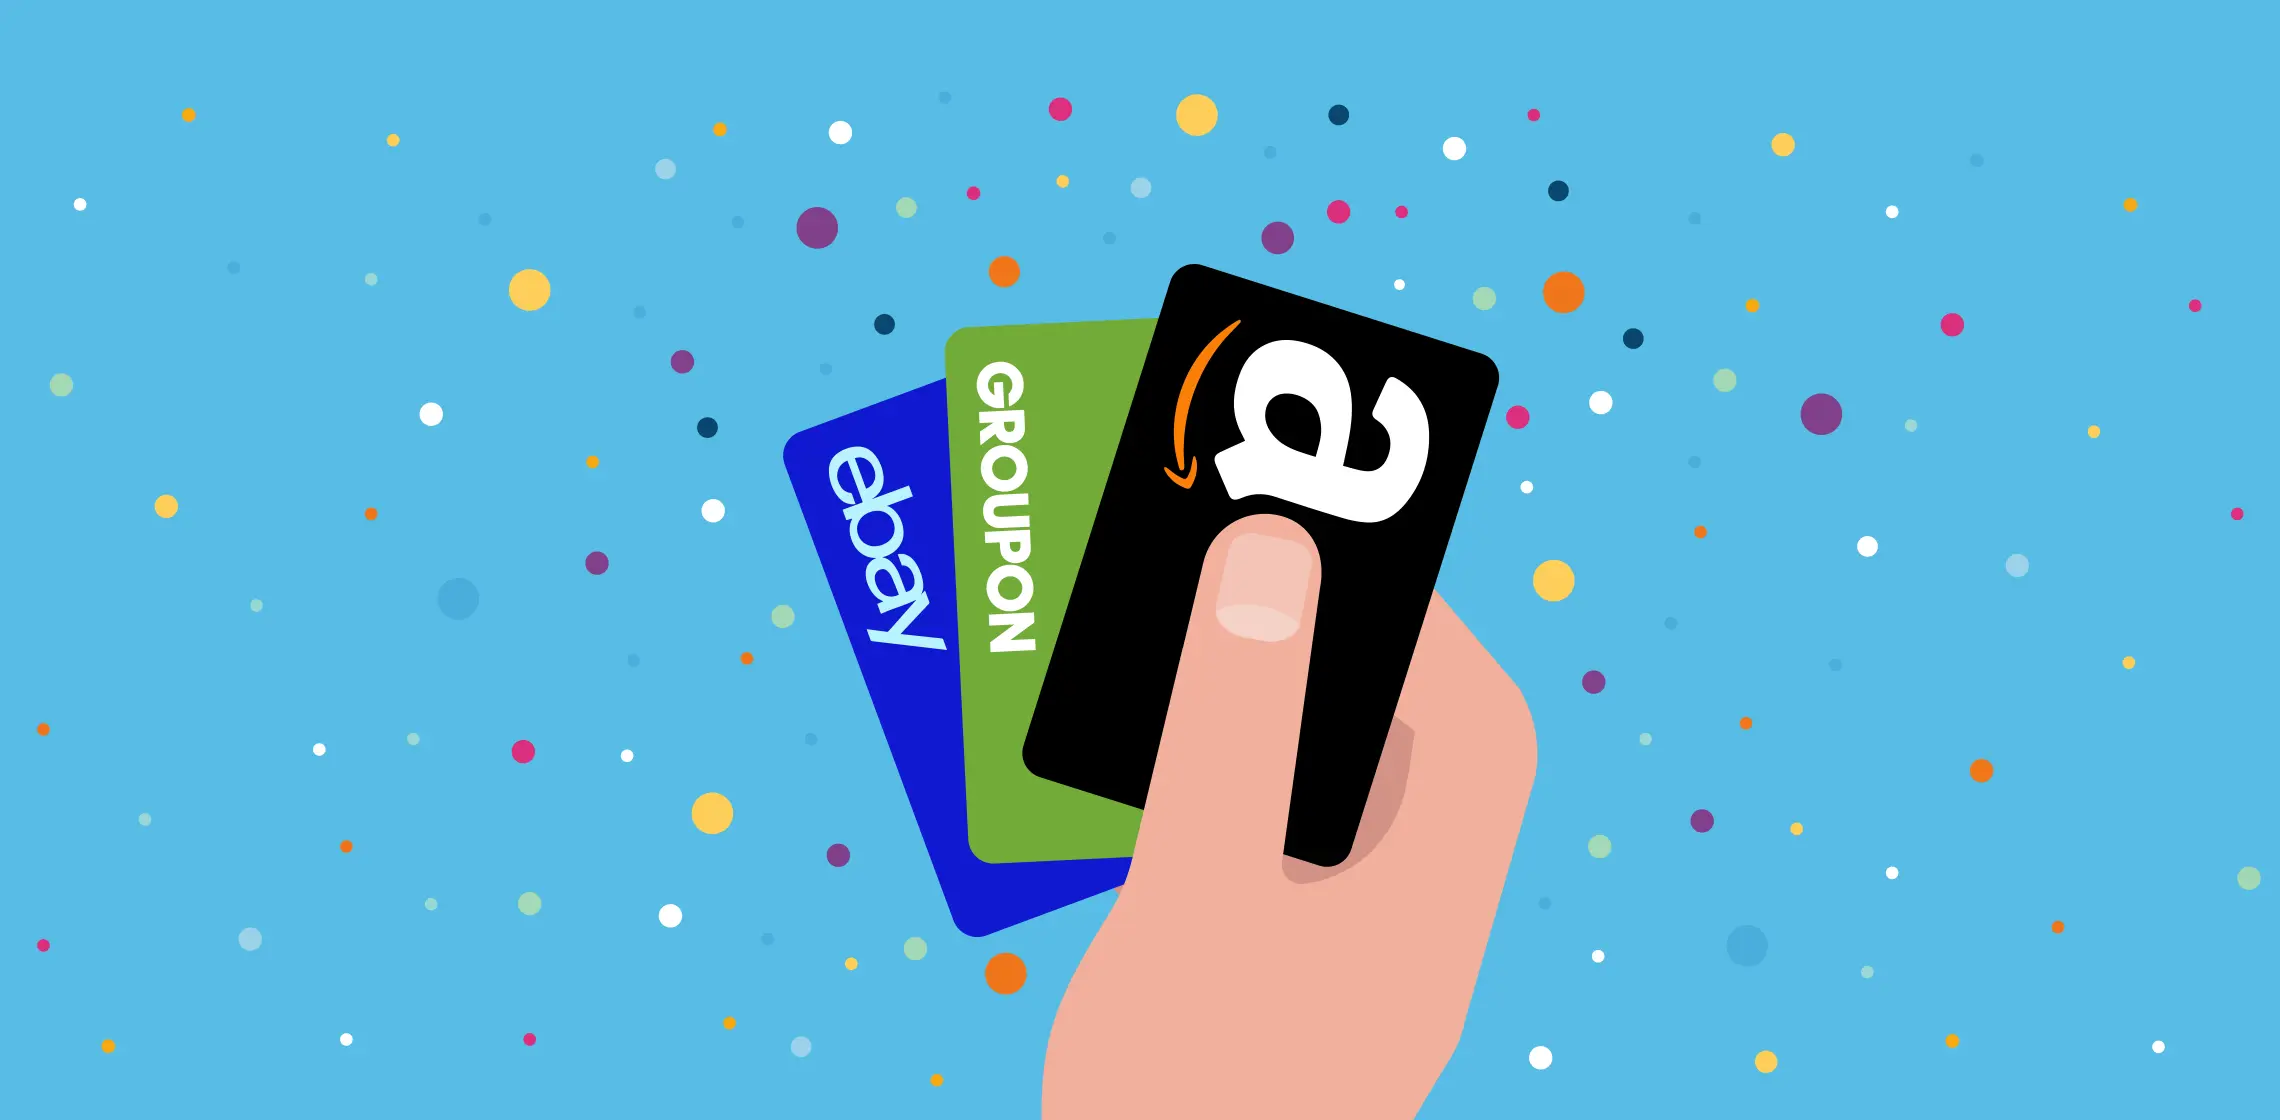 New rewards in the app Amazon gift cards Ebay and Groupon